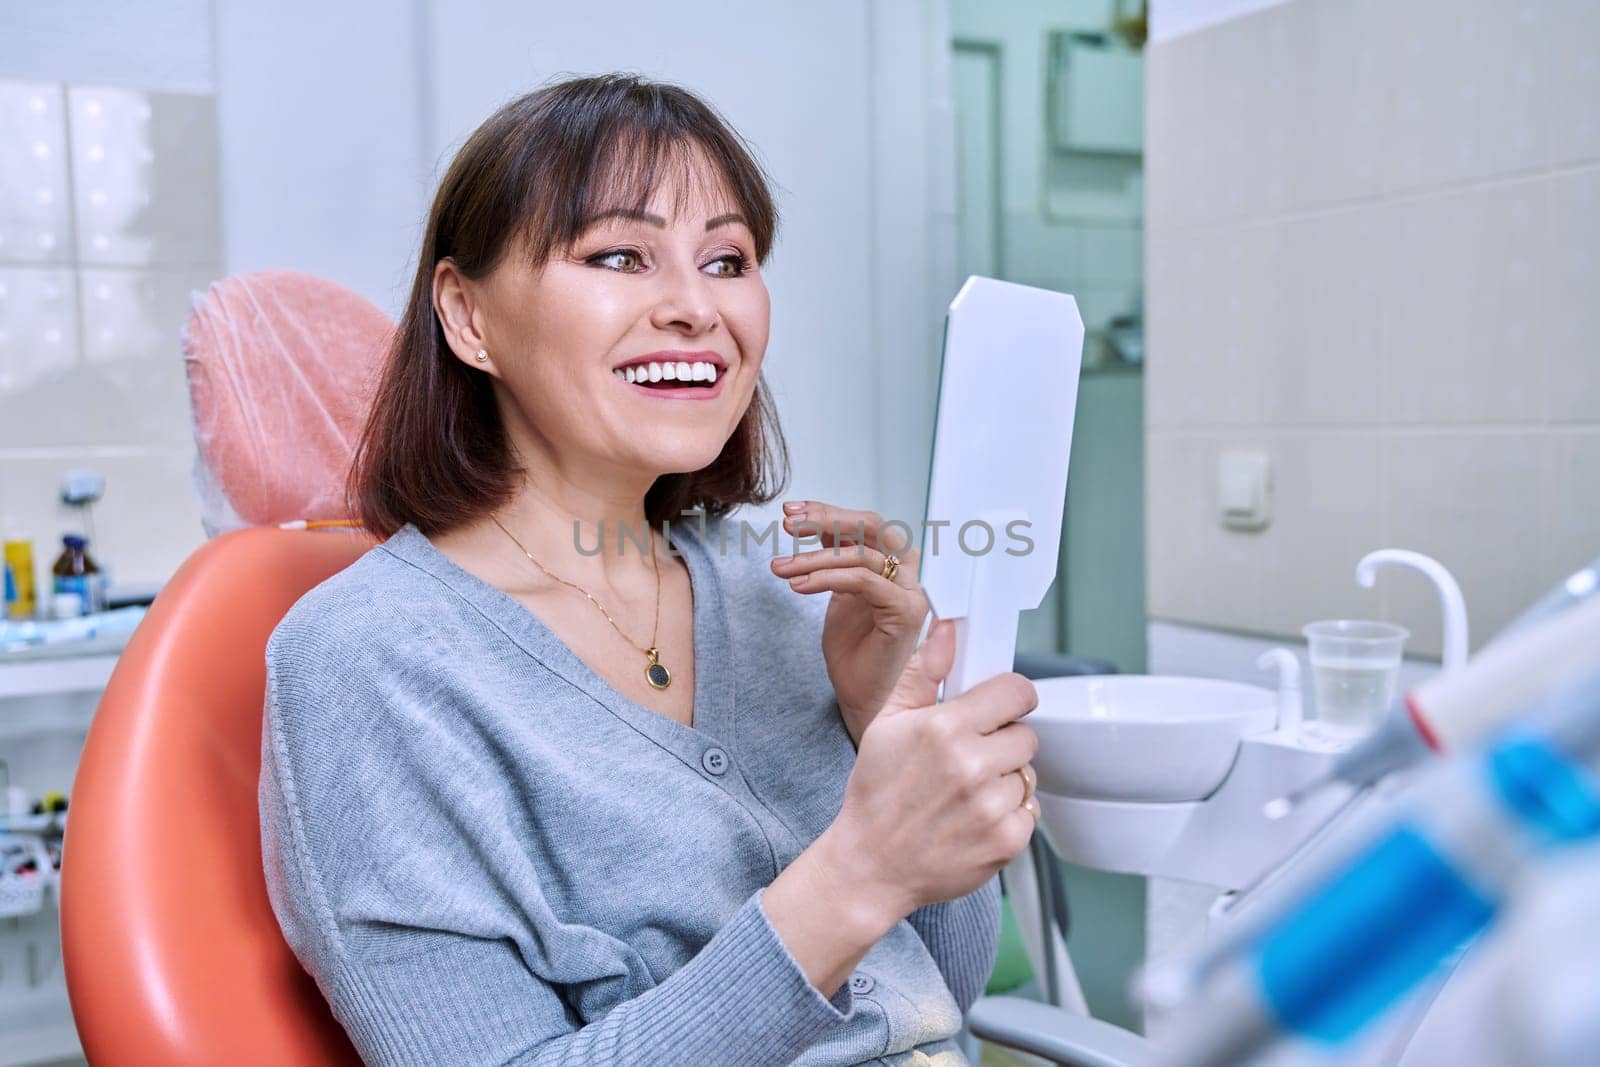 Smiling middle aged woman in dental chair in dentist's office with mirror looking at her teeth. Treatment, therapy, dental care, prosthetics, dentistry concept